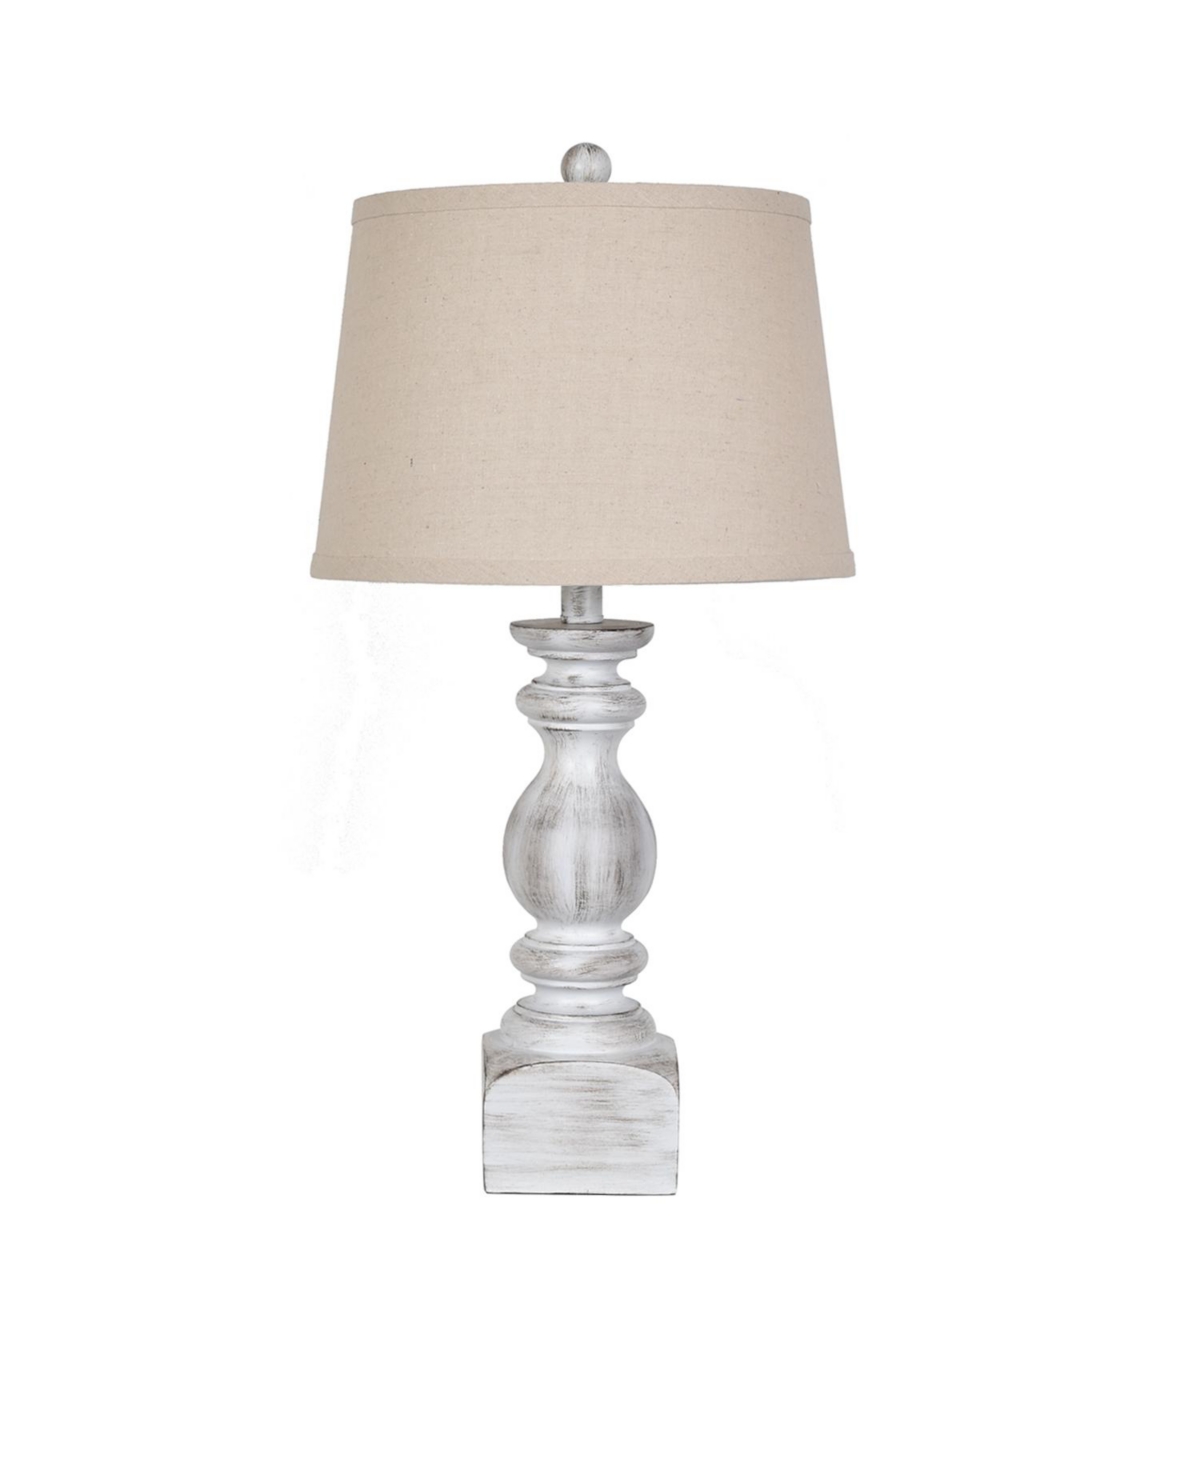 Crestview Collection 25" Table Lamp In Beige,khaki